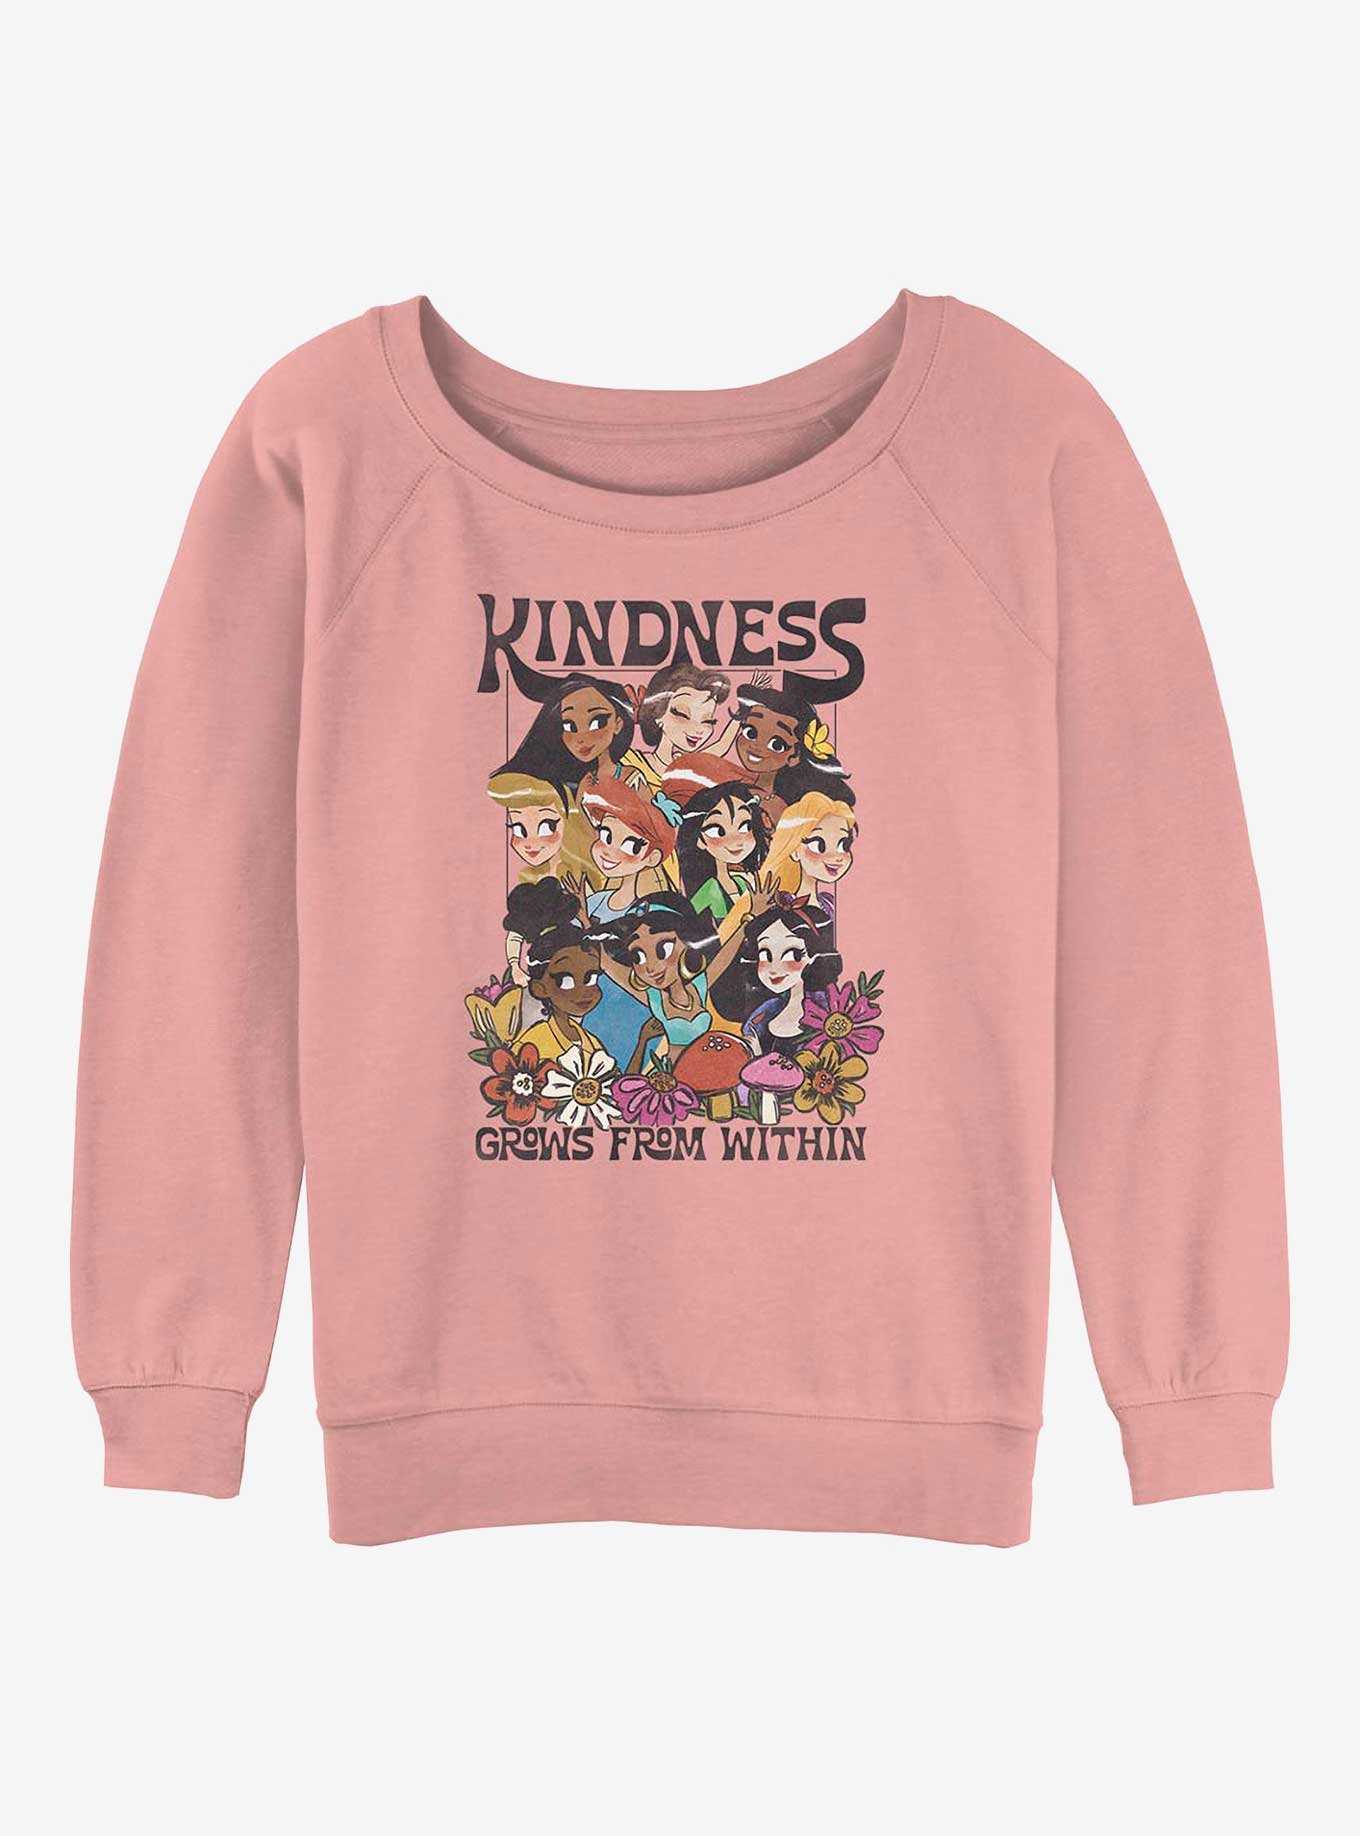 Disney Pocahontas Kindness Grows From Within Girls Slouchy Sweatshirt, , hi-res